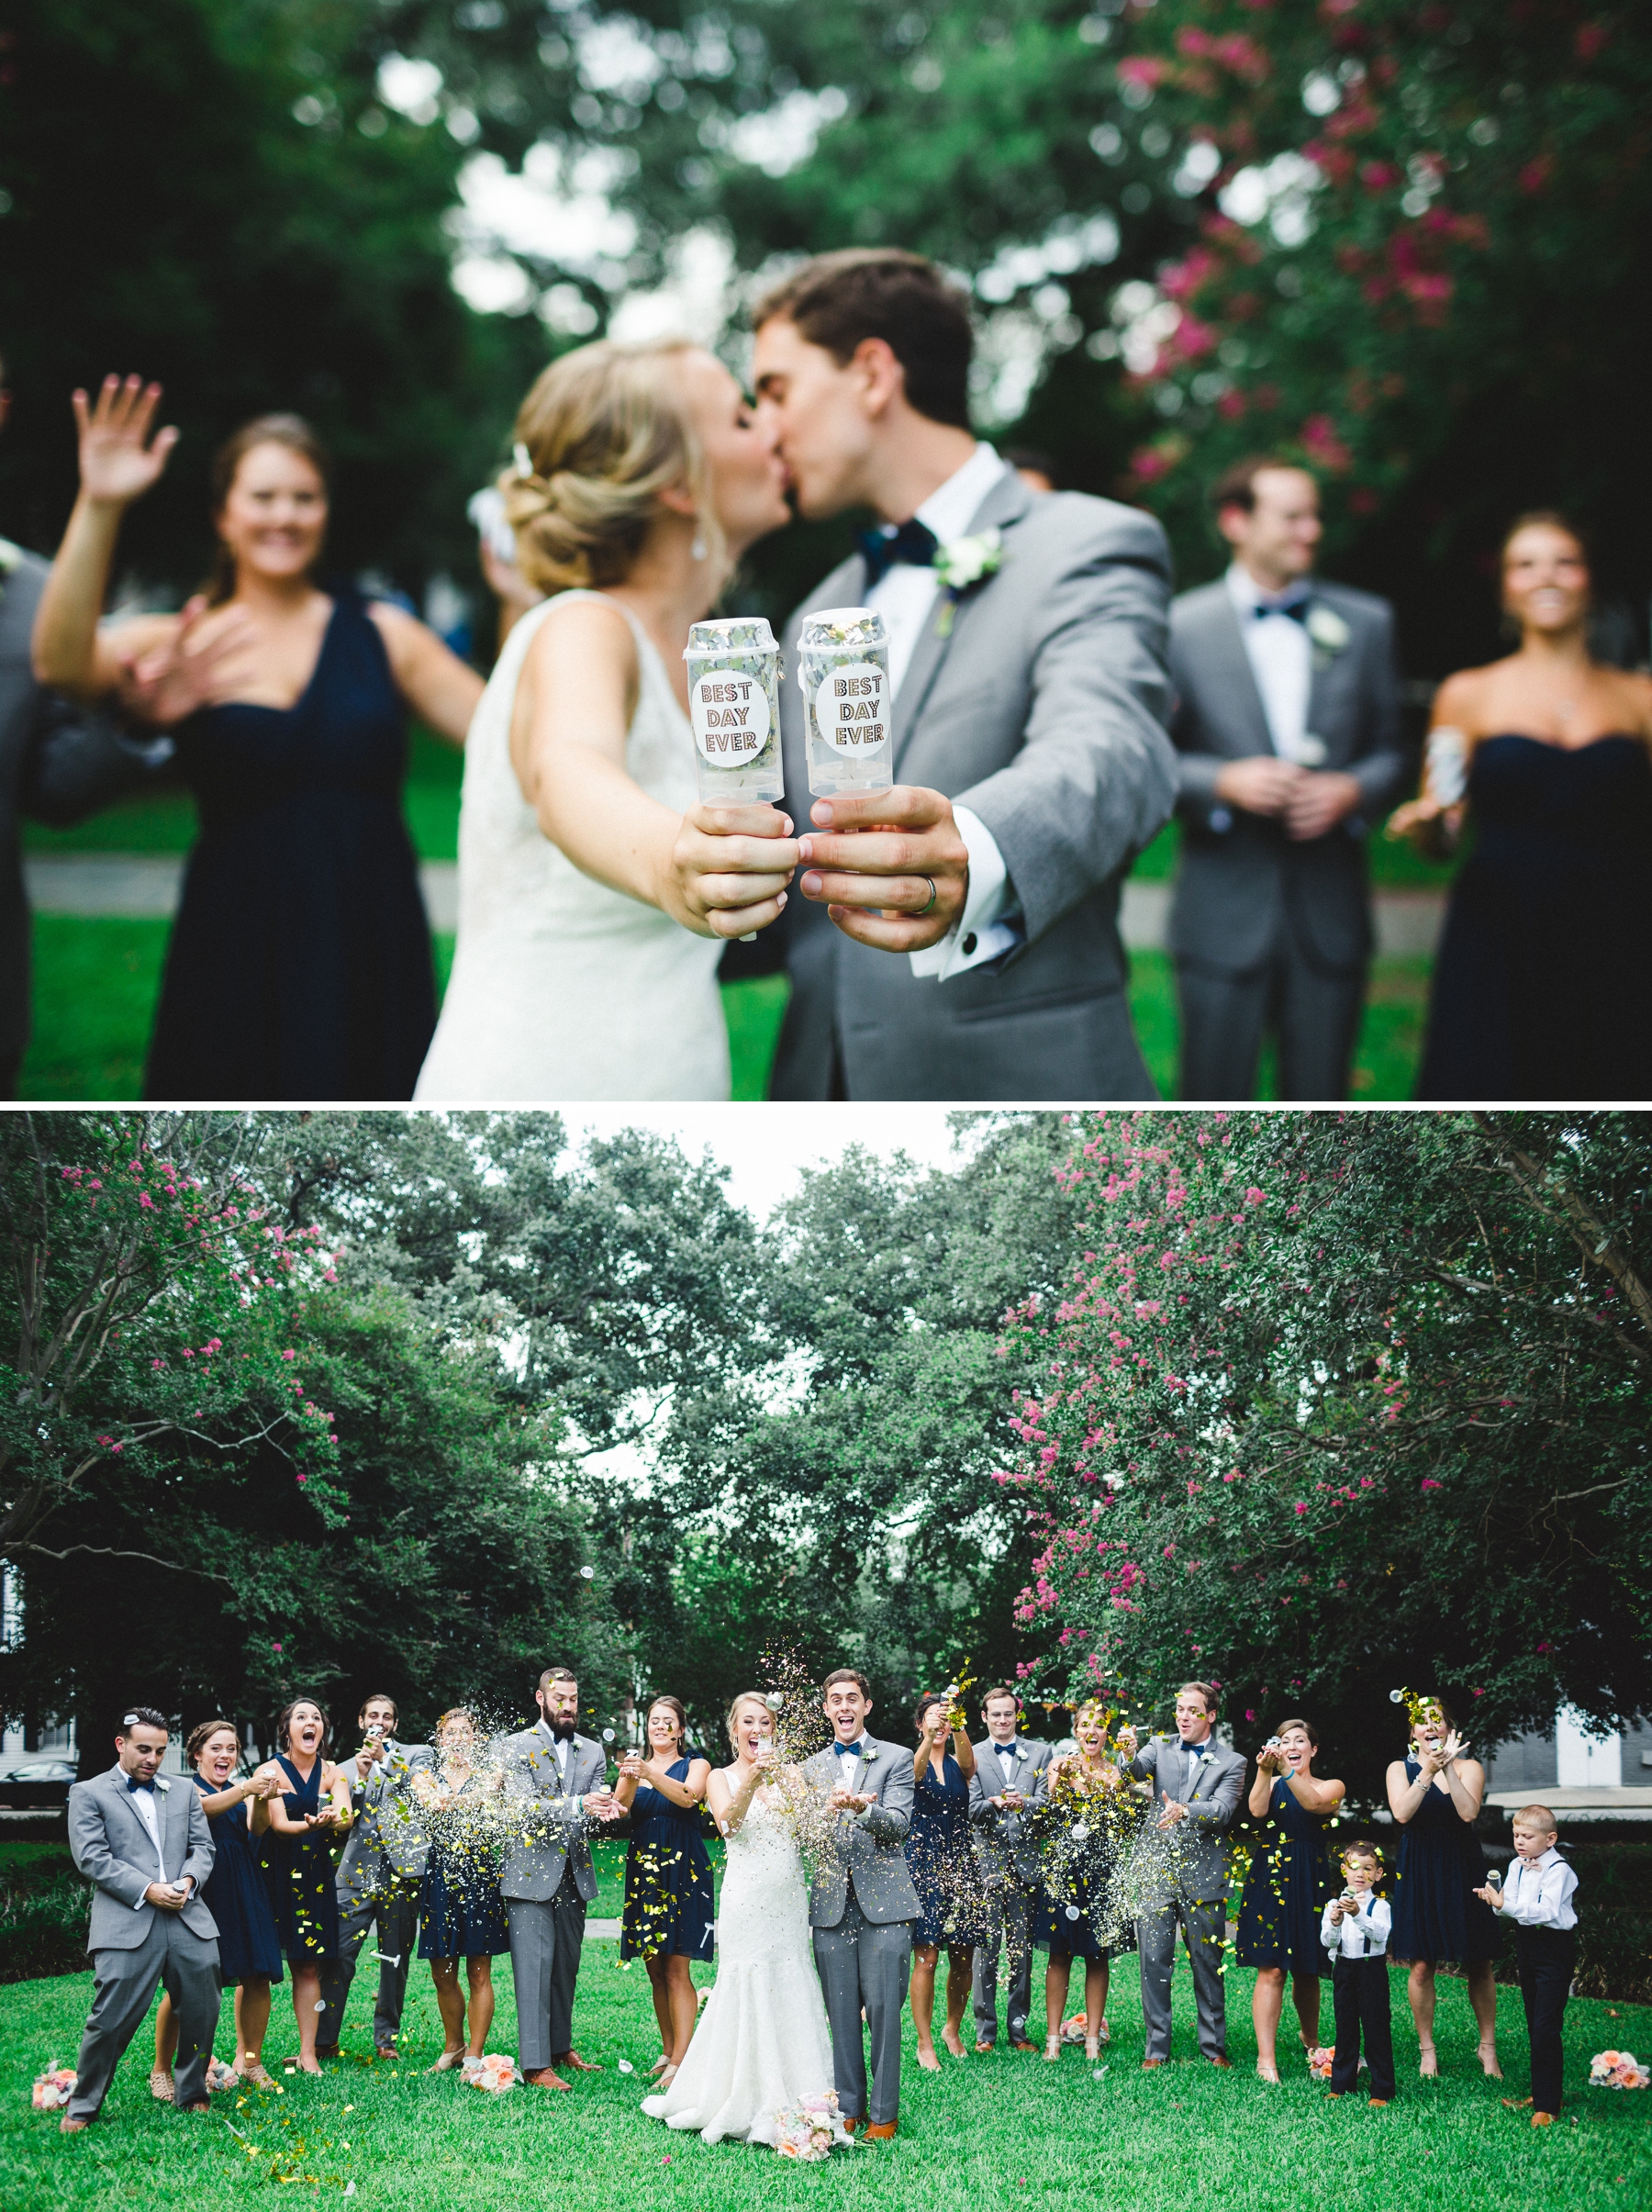 Gold glitter poppers, wedding confetti poppers – Izzy Hudgins Photography